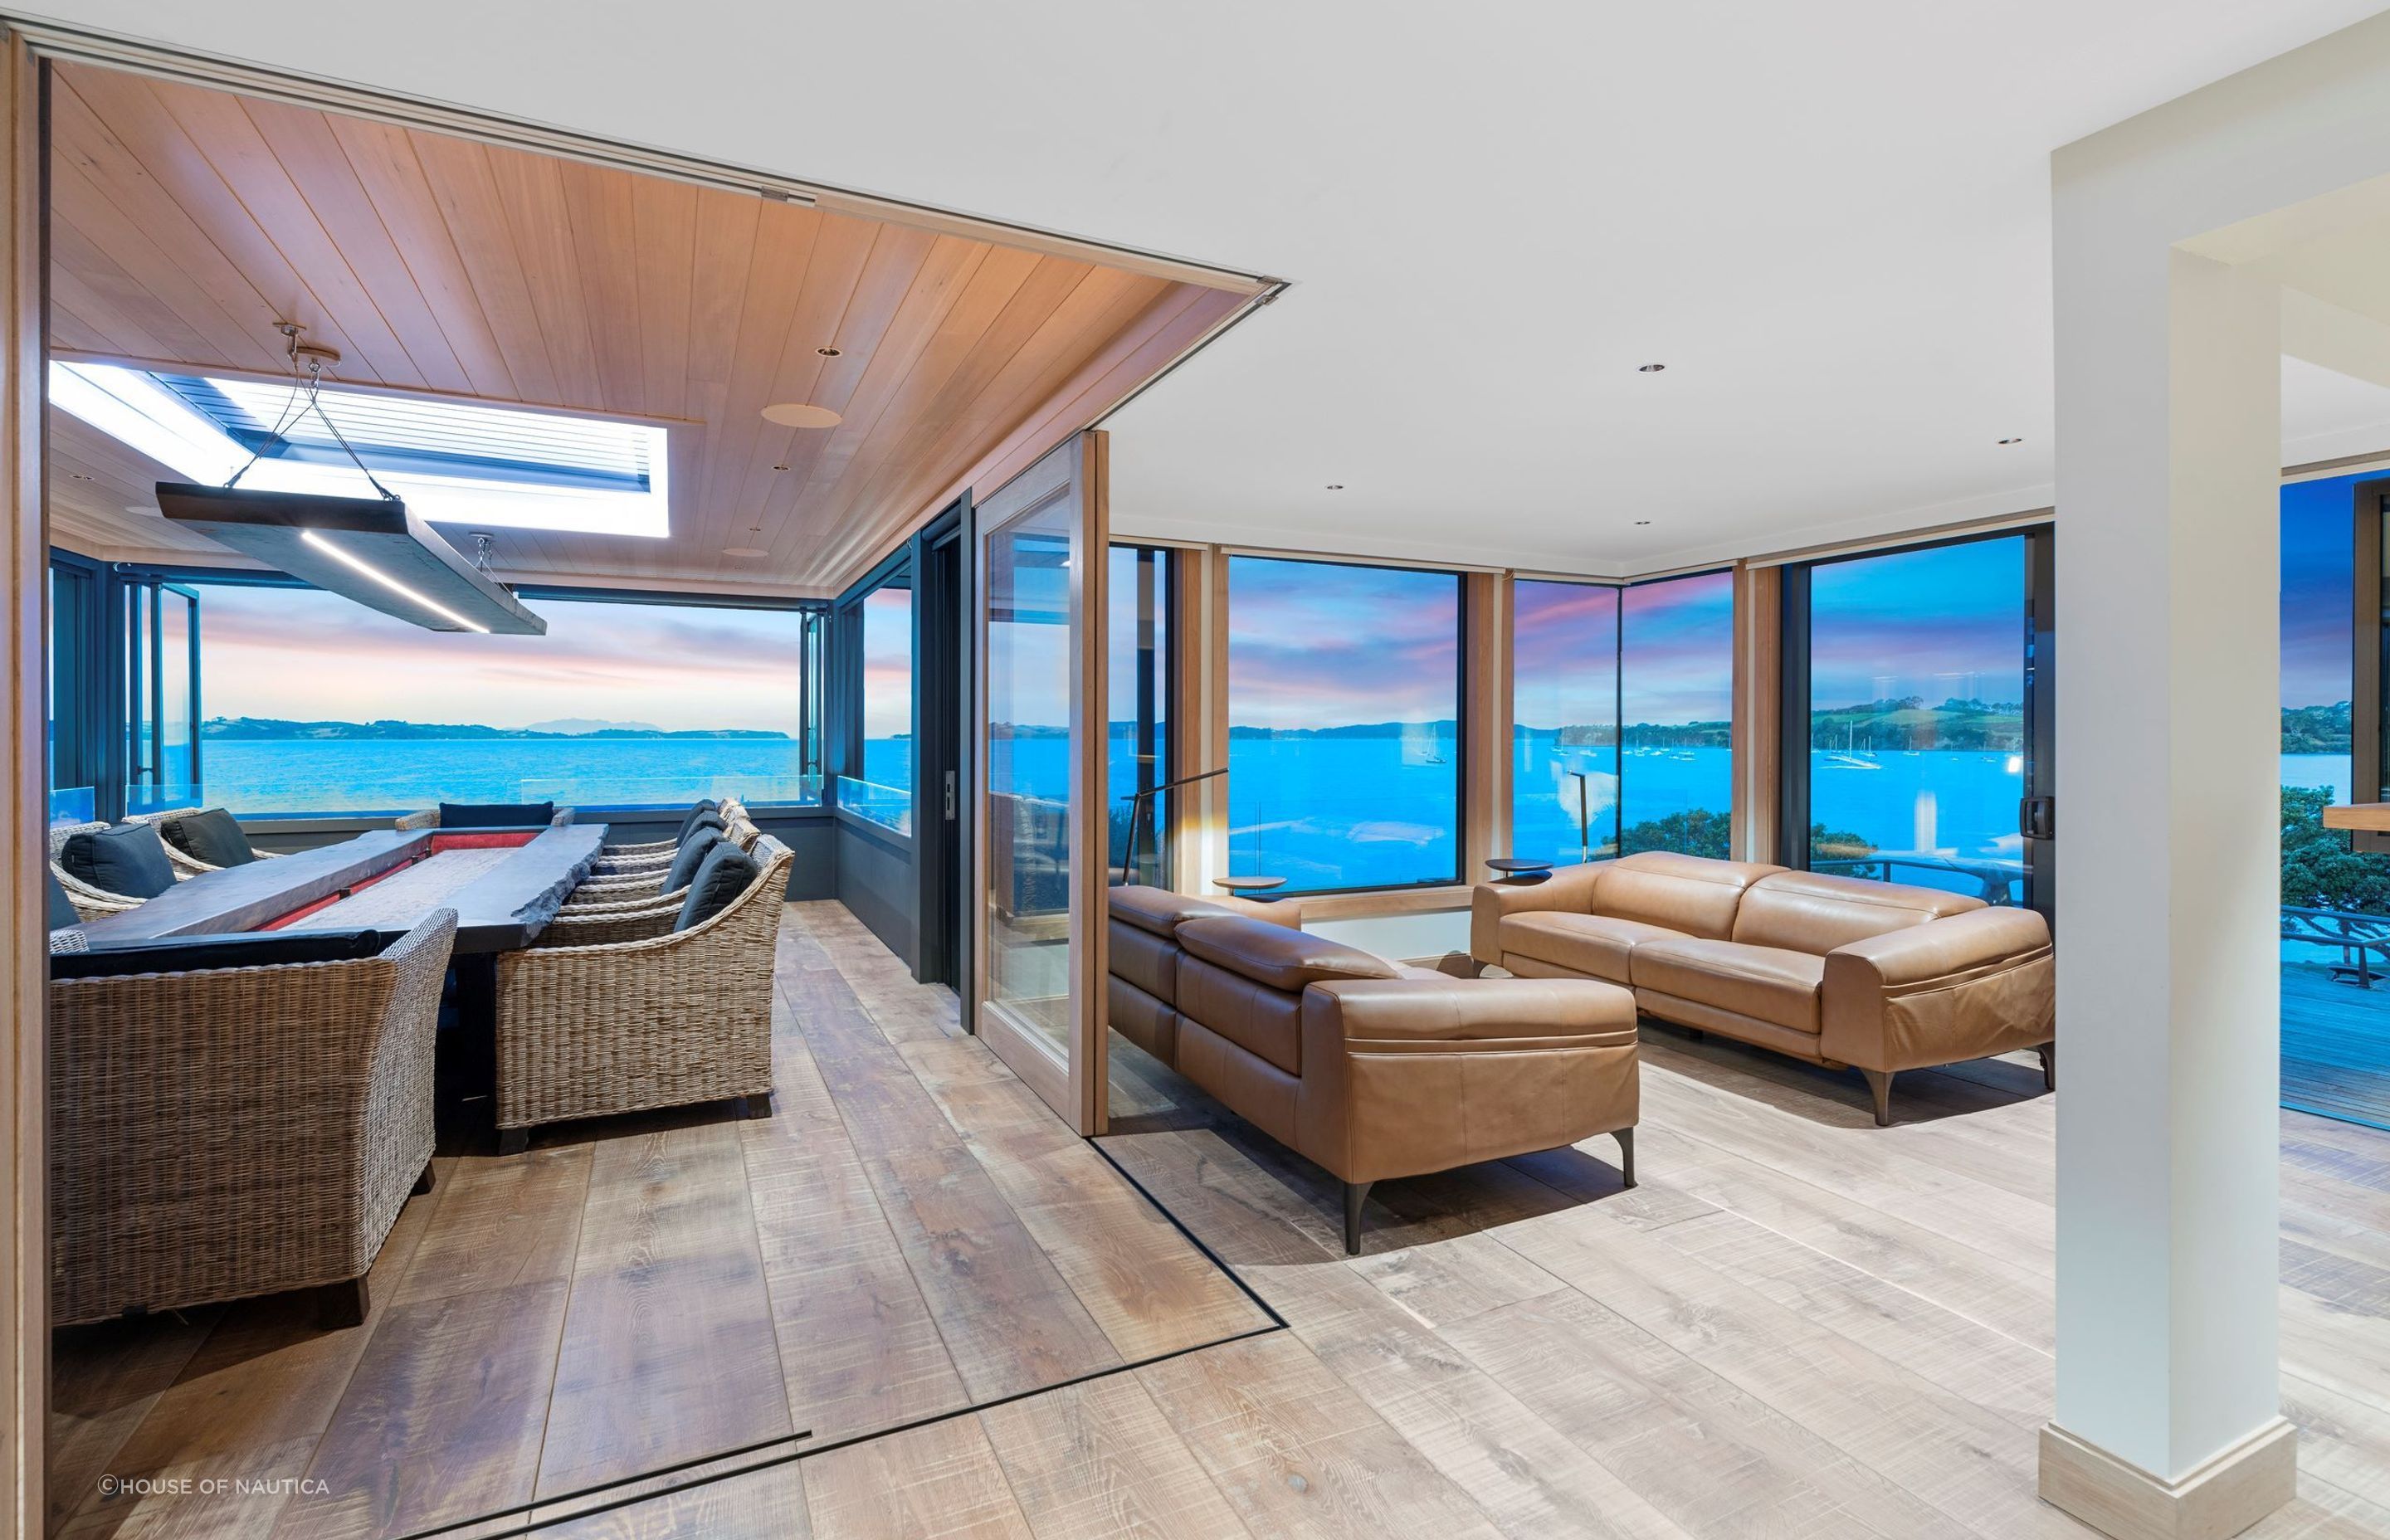 The home's design allows one and all to appreciate its exquisite coastal views. | Photography: Bev Snyder